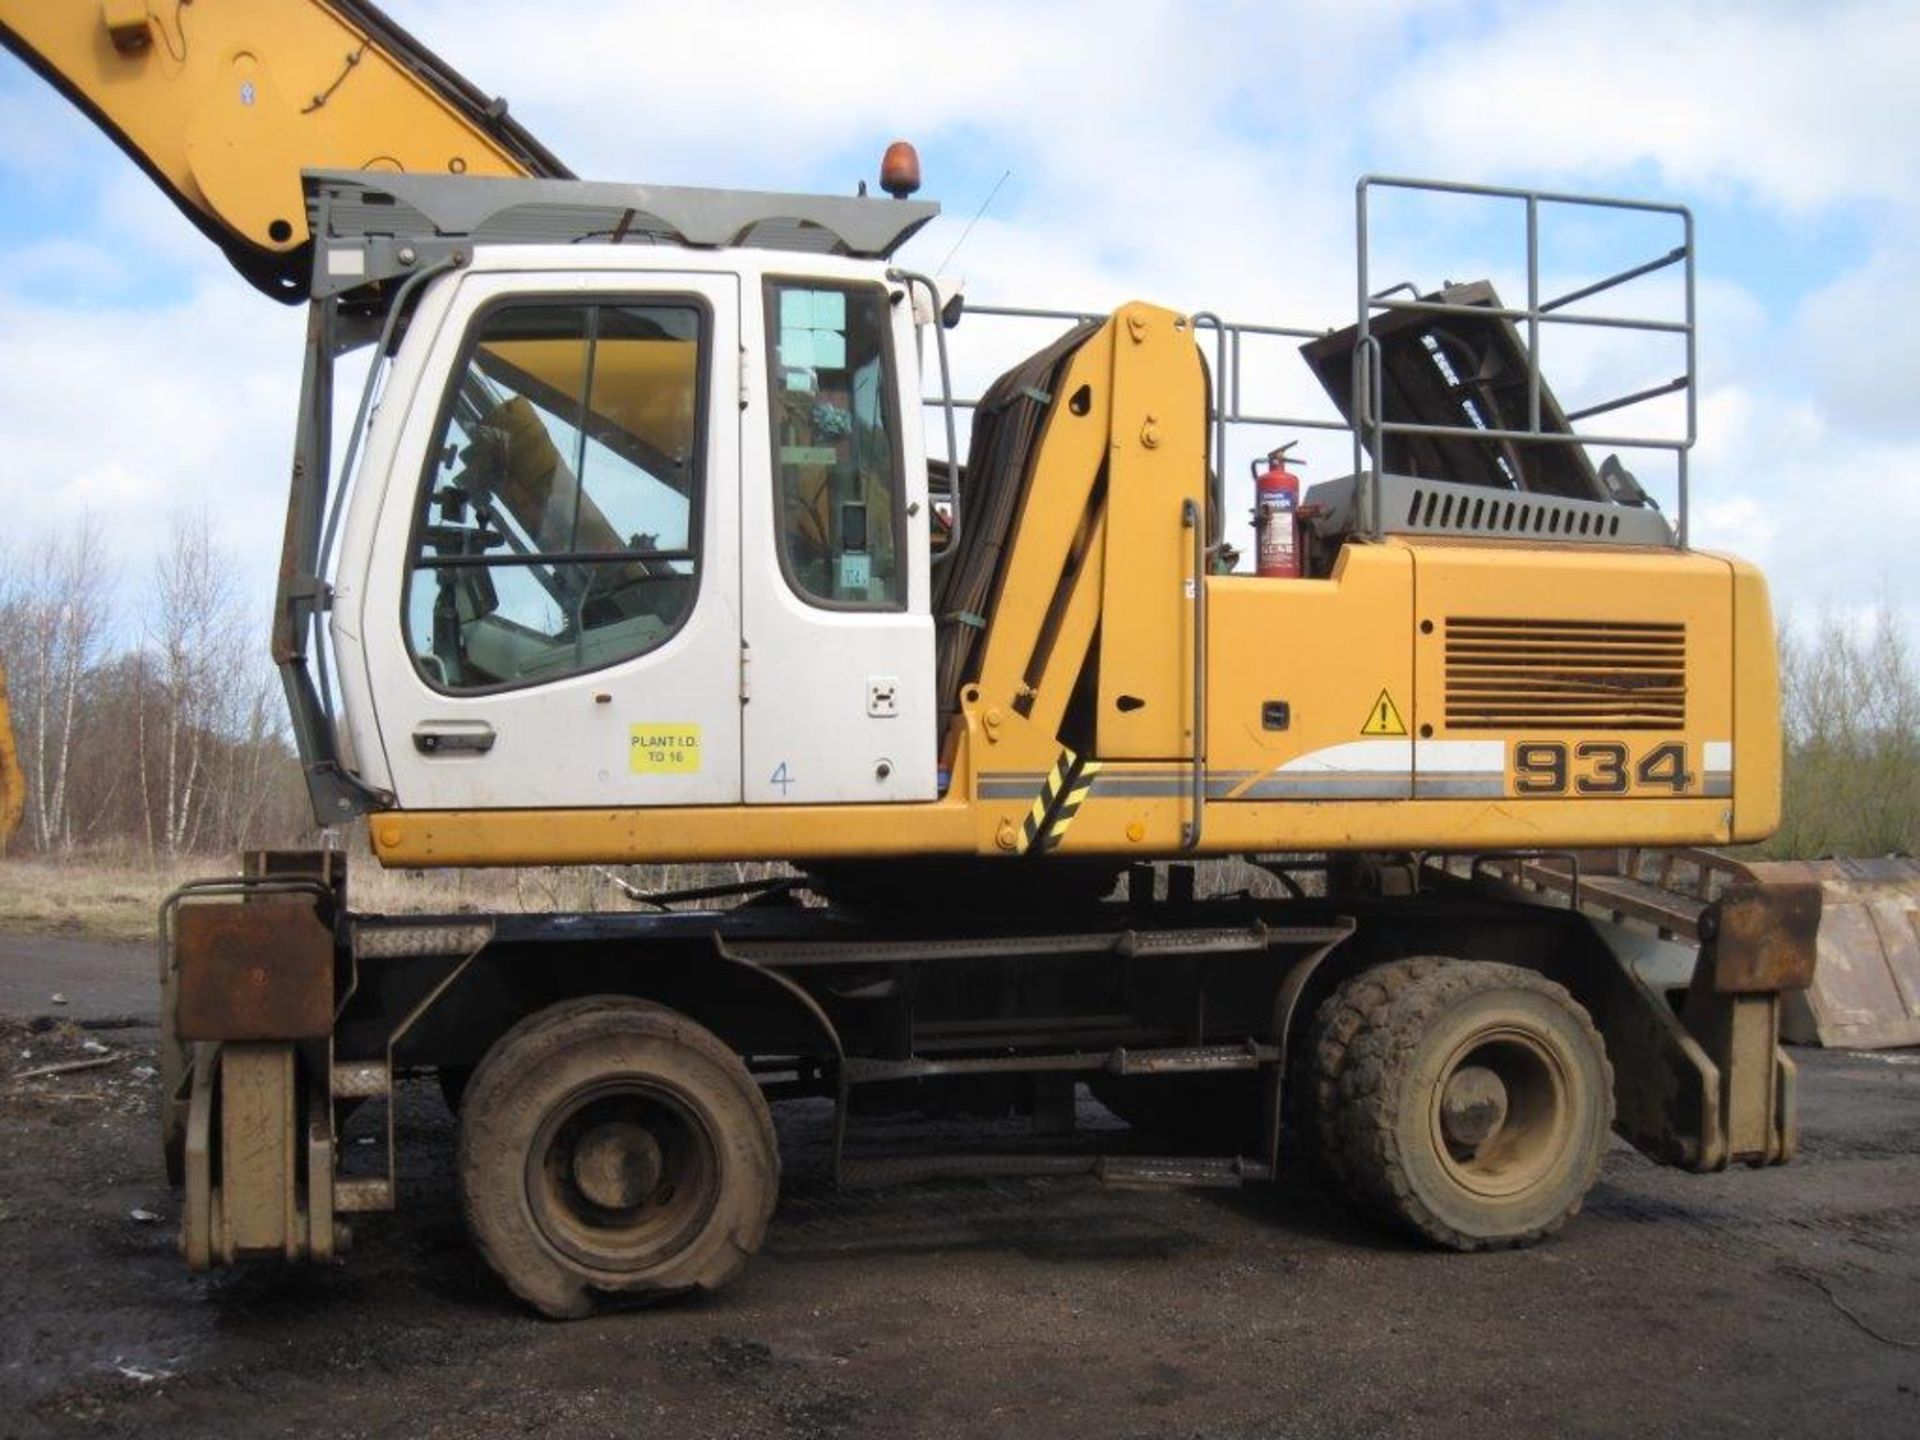 Liebherr 934C
2007, very good condition, hydraulic high rise cab, long reach rehandler, solid tyres